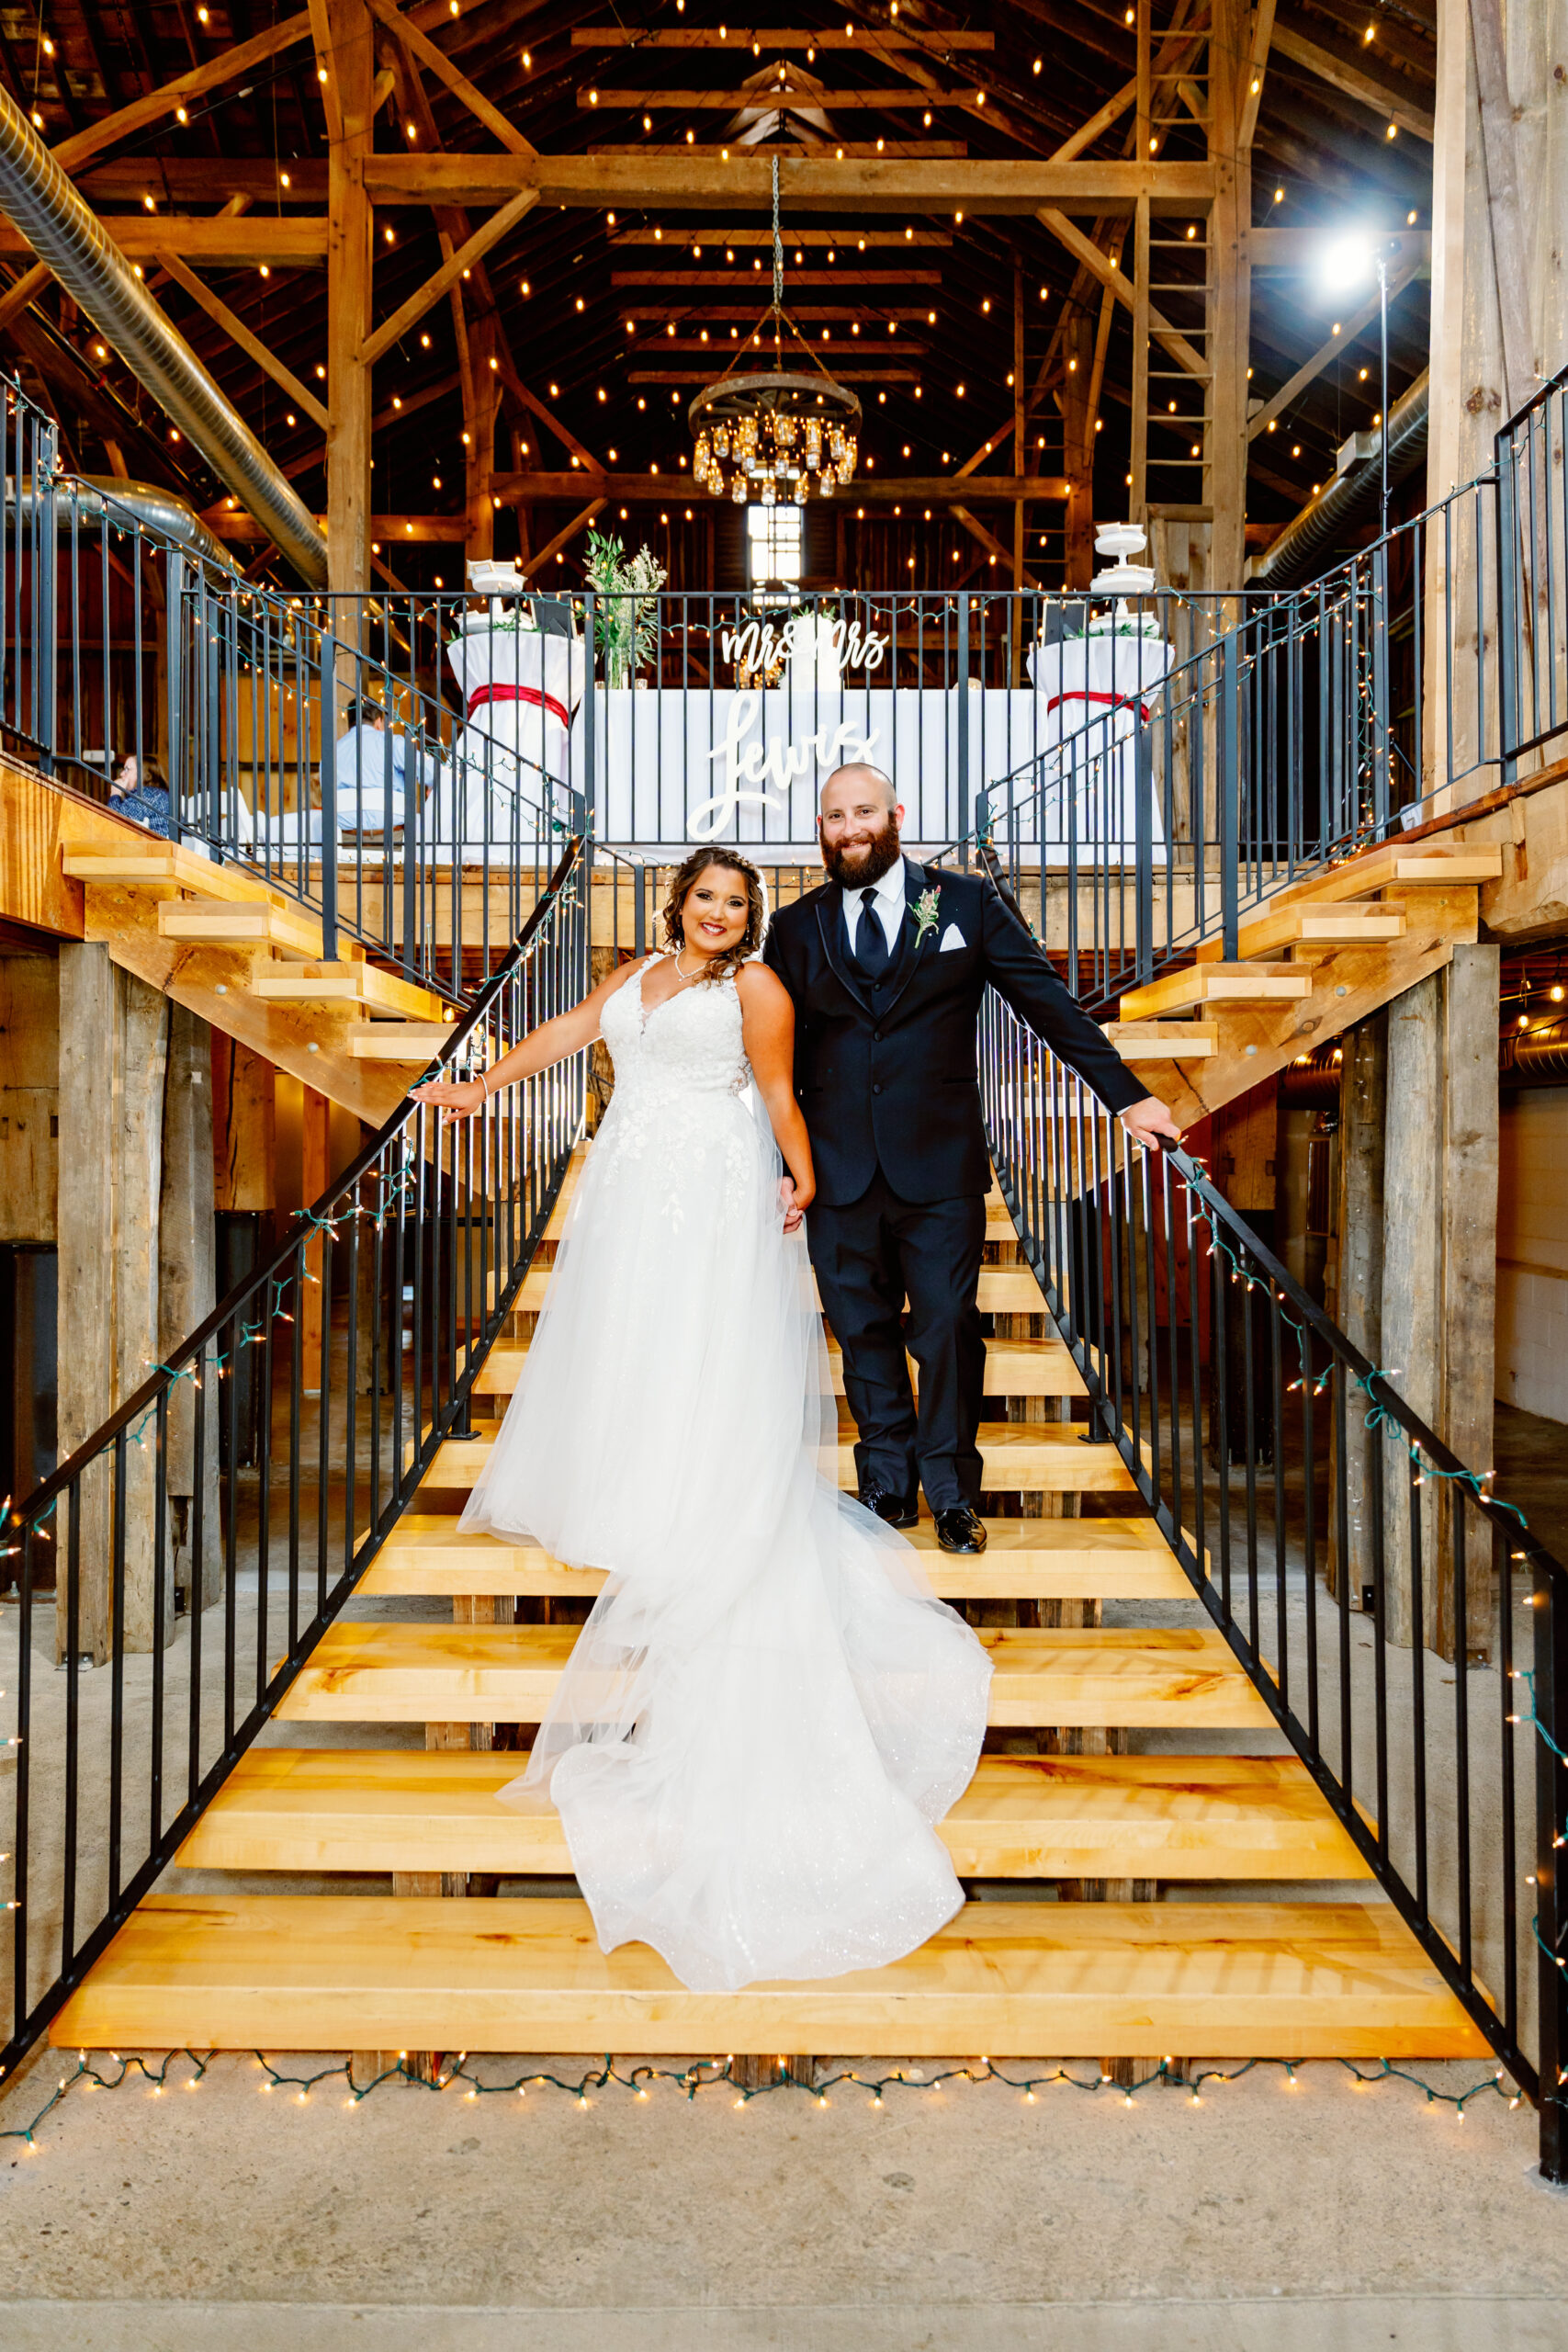 The bride and groom on the staircase.